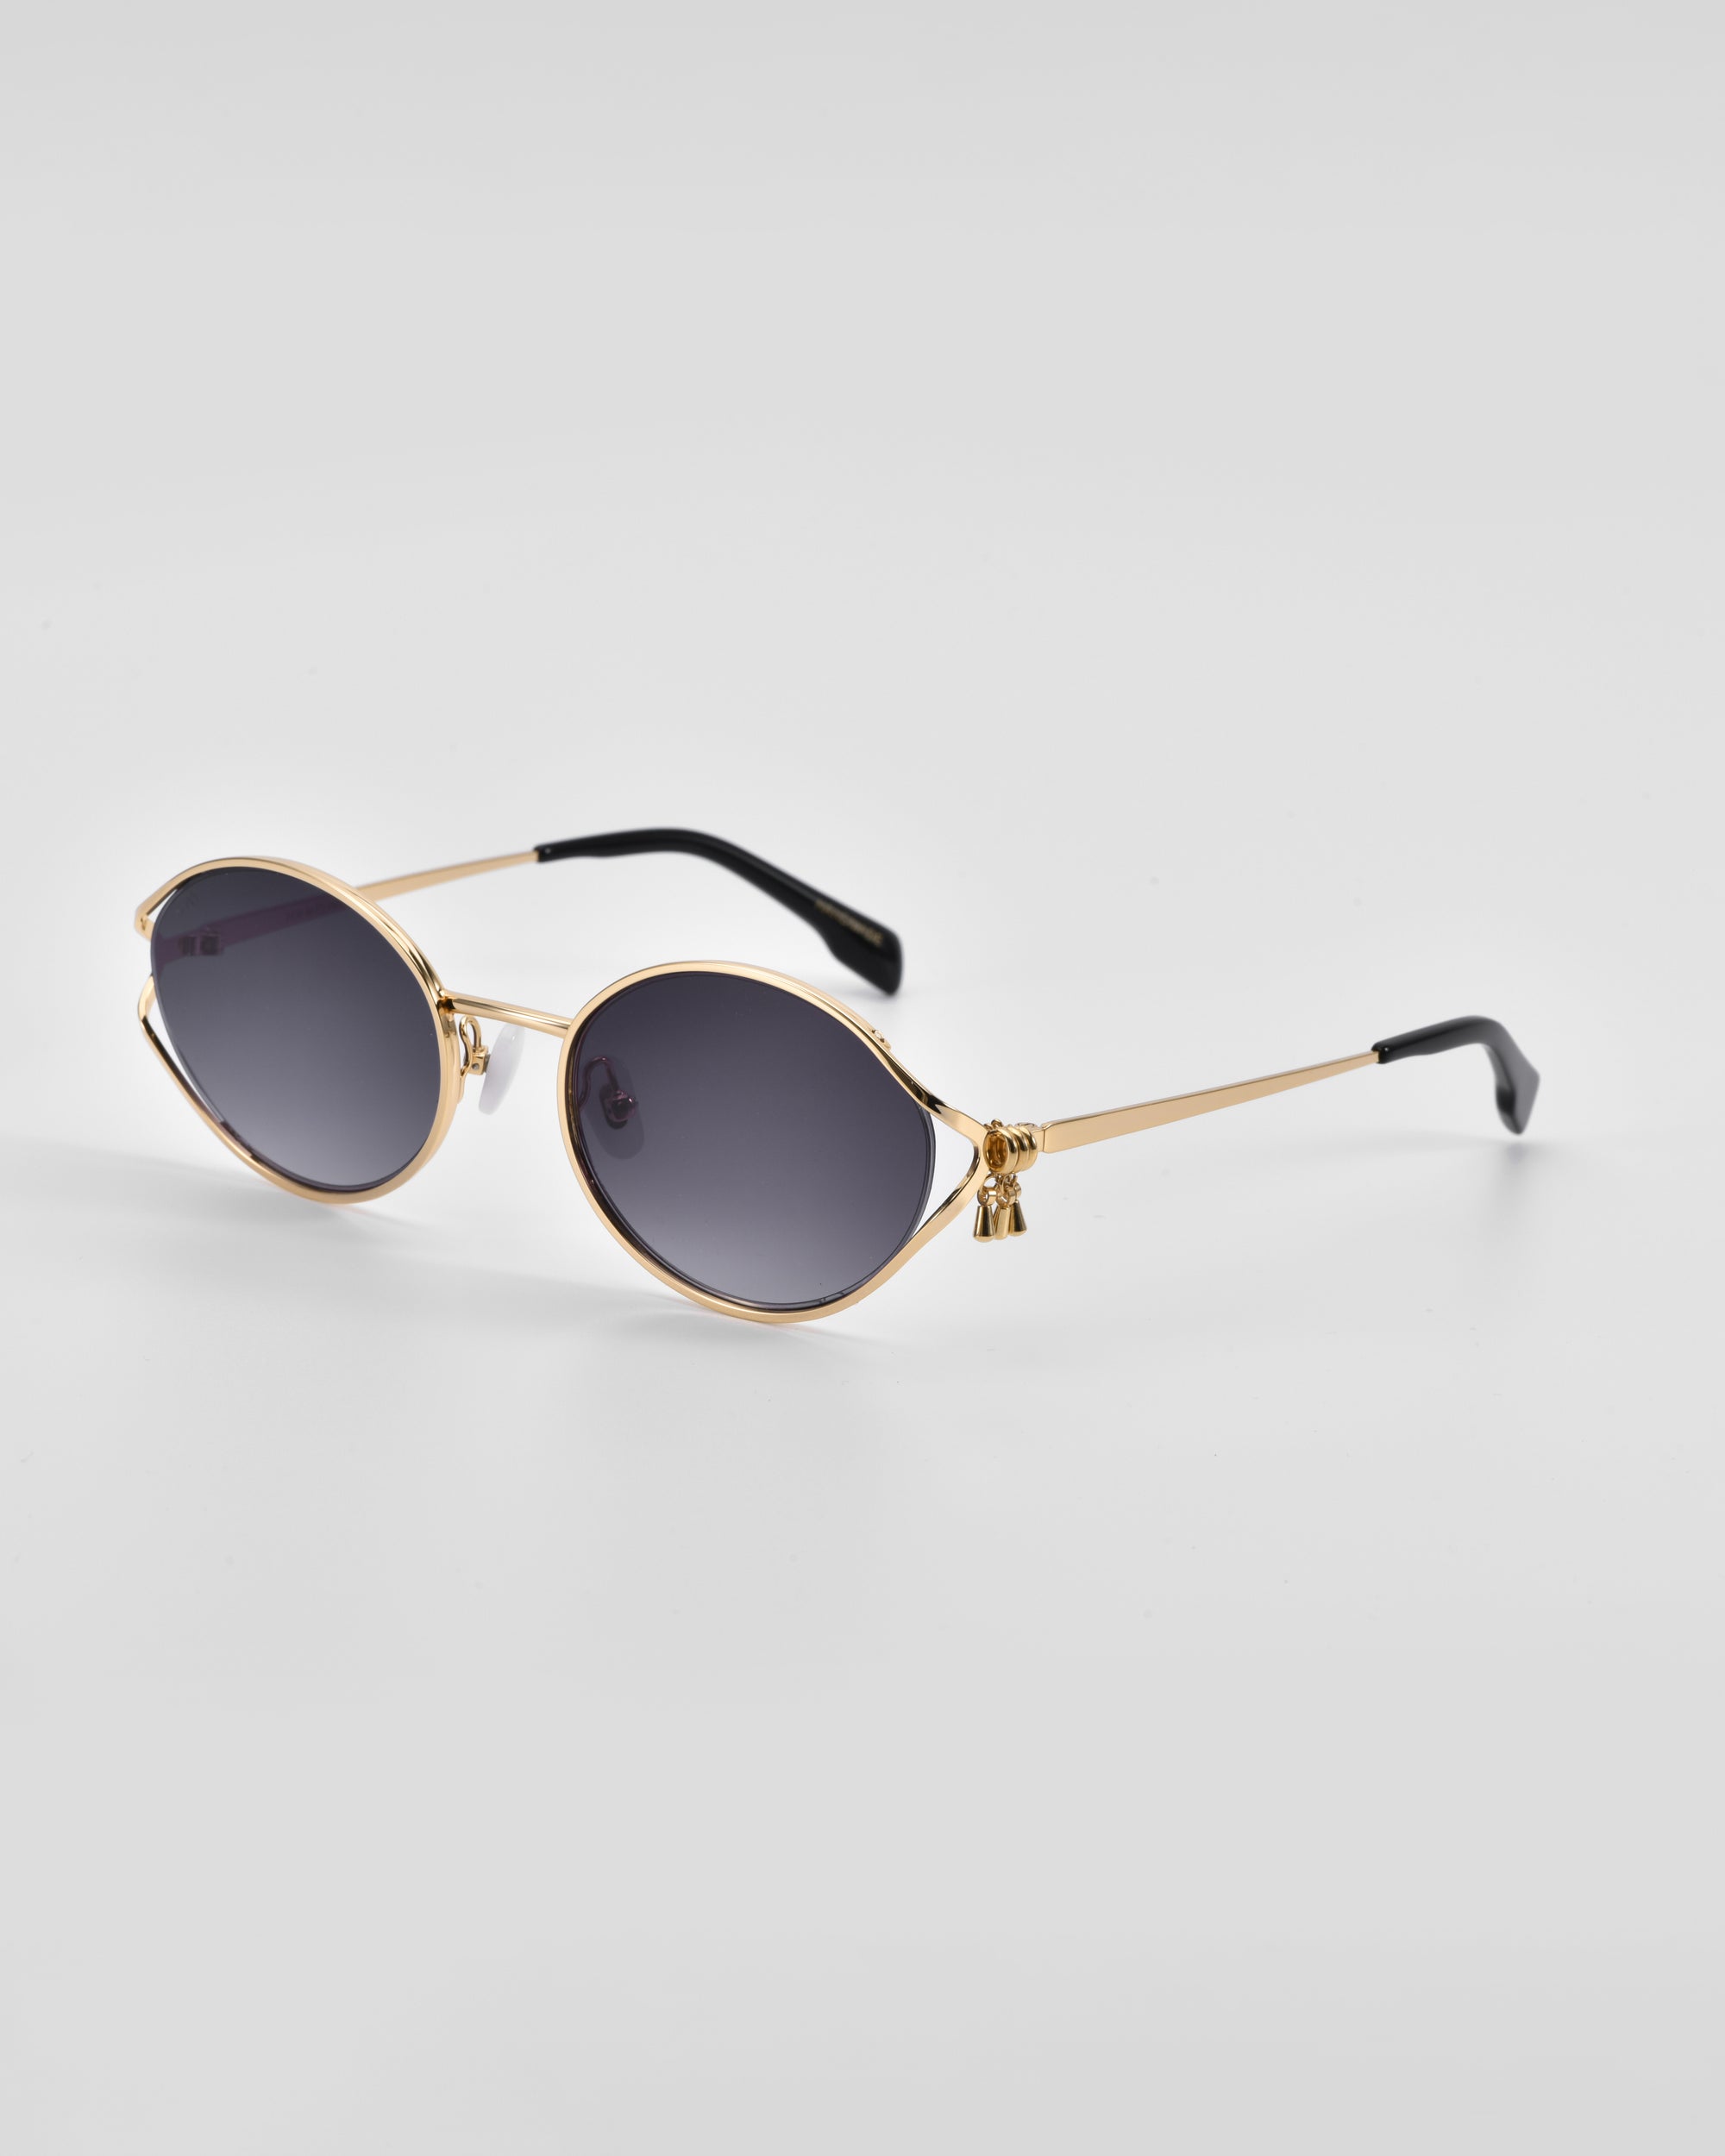 A pair of stylish For Art's Sake® Sky sunglasses with golden metal frames and dark, oval lenses. The temples have black tips, providing a contrast against the 18-karat gold. The natural jade-stone nose pads add an extra touch of luxury. The background is a clean white surface, highlighting the elegant design of the sunglasses.